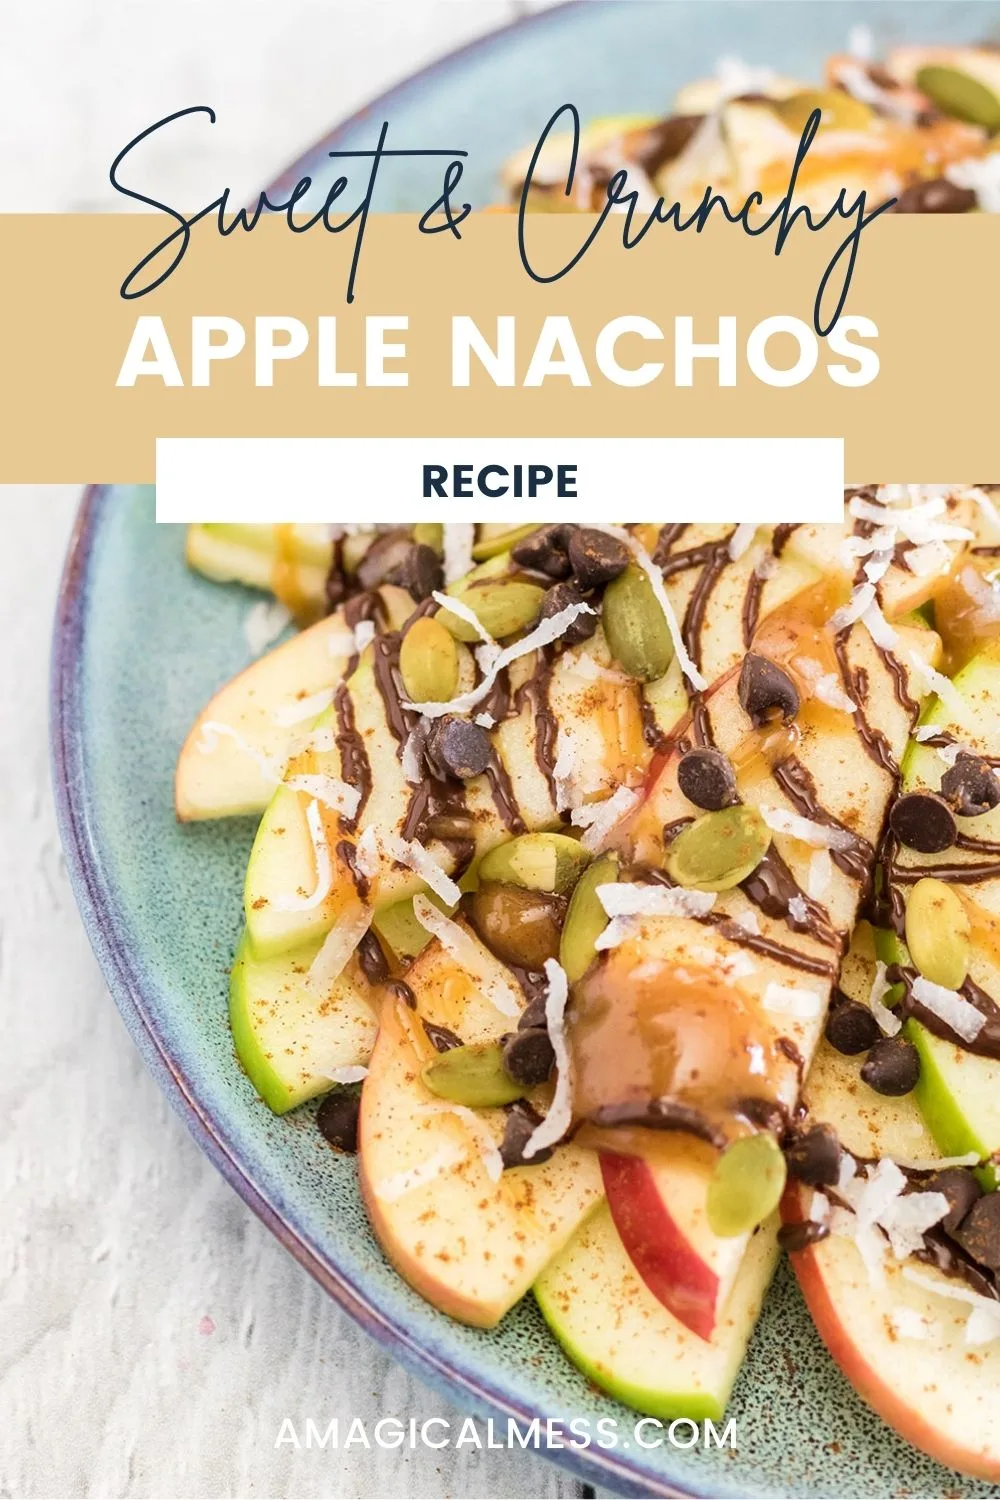 Apple nachos on a plate drizzled with caramel, chocolate, and other toppings